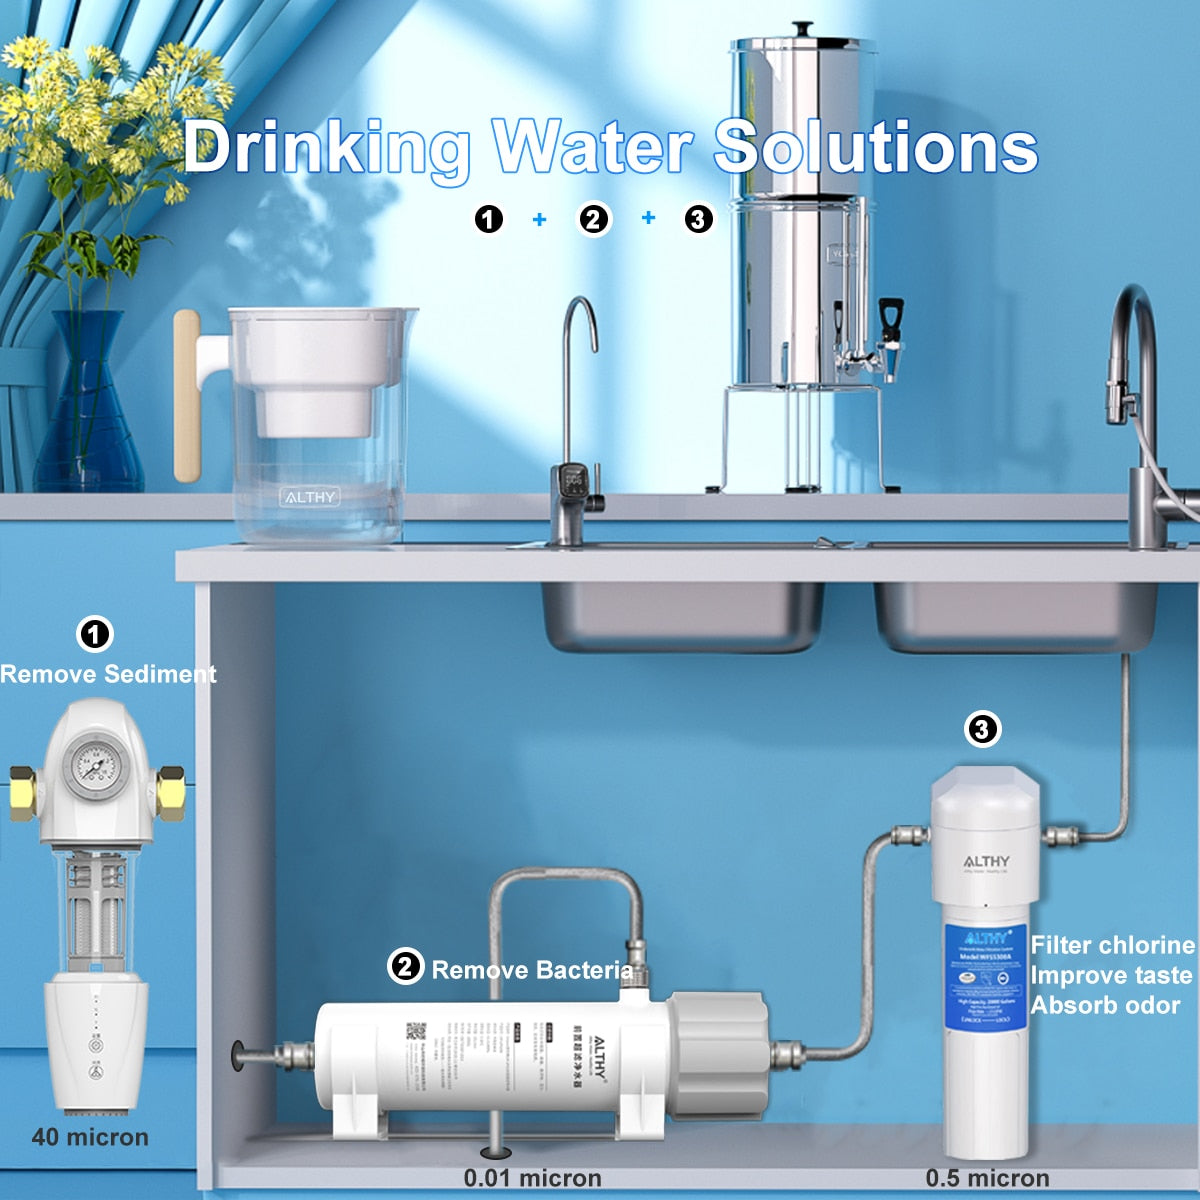 ALTHY 0.01μm PVDF Ultrafiltration Water Filter Purifier System for Bacterial Reduction, Washable UF Membrane,  Drinking Water  Hardware > Plumbing > Water Dispensing & Filtration 209.76 EZYSELLA SHOP